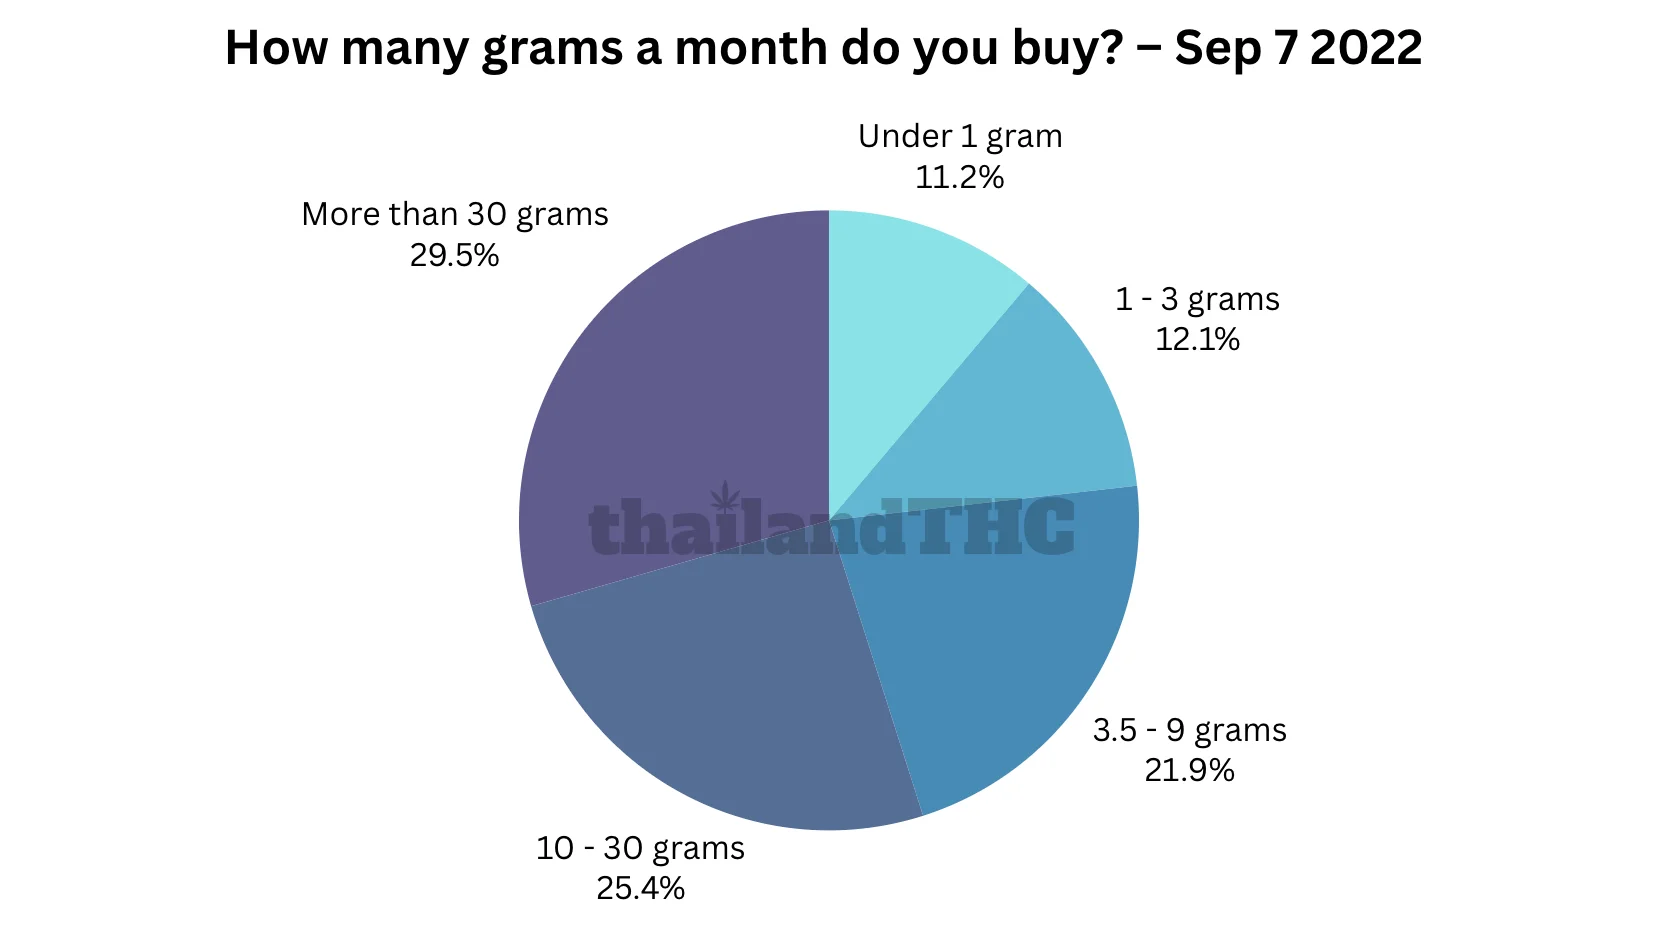 How many grams a month do you buy?